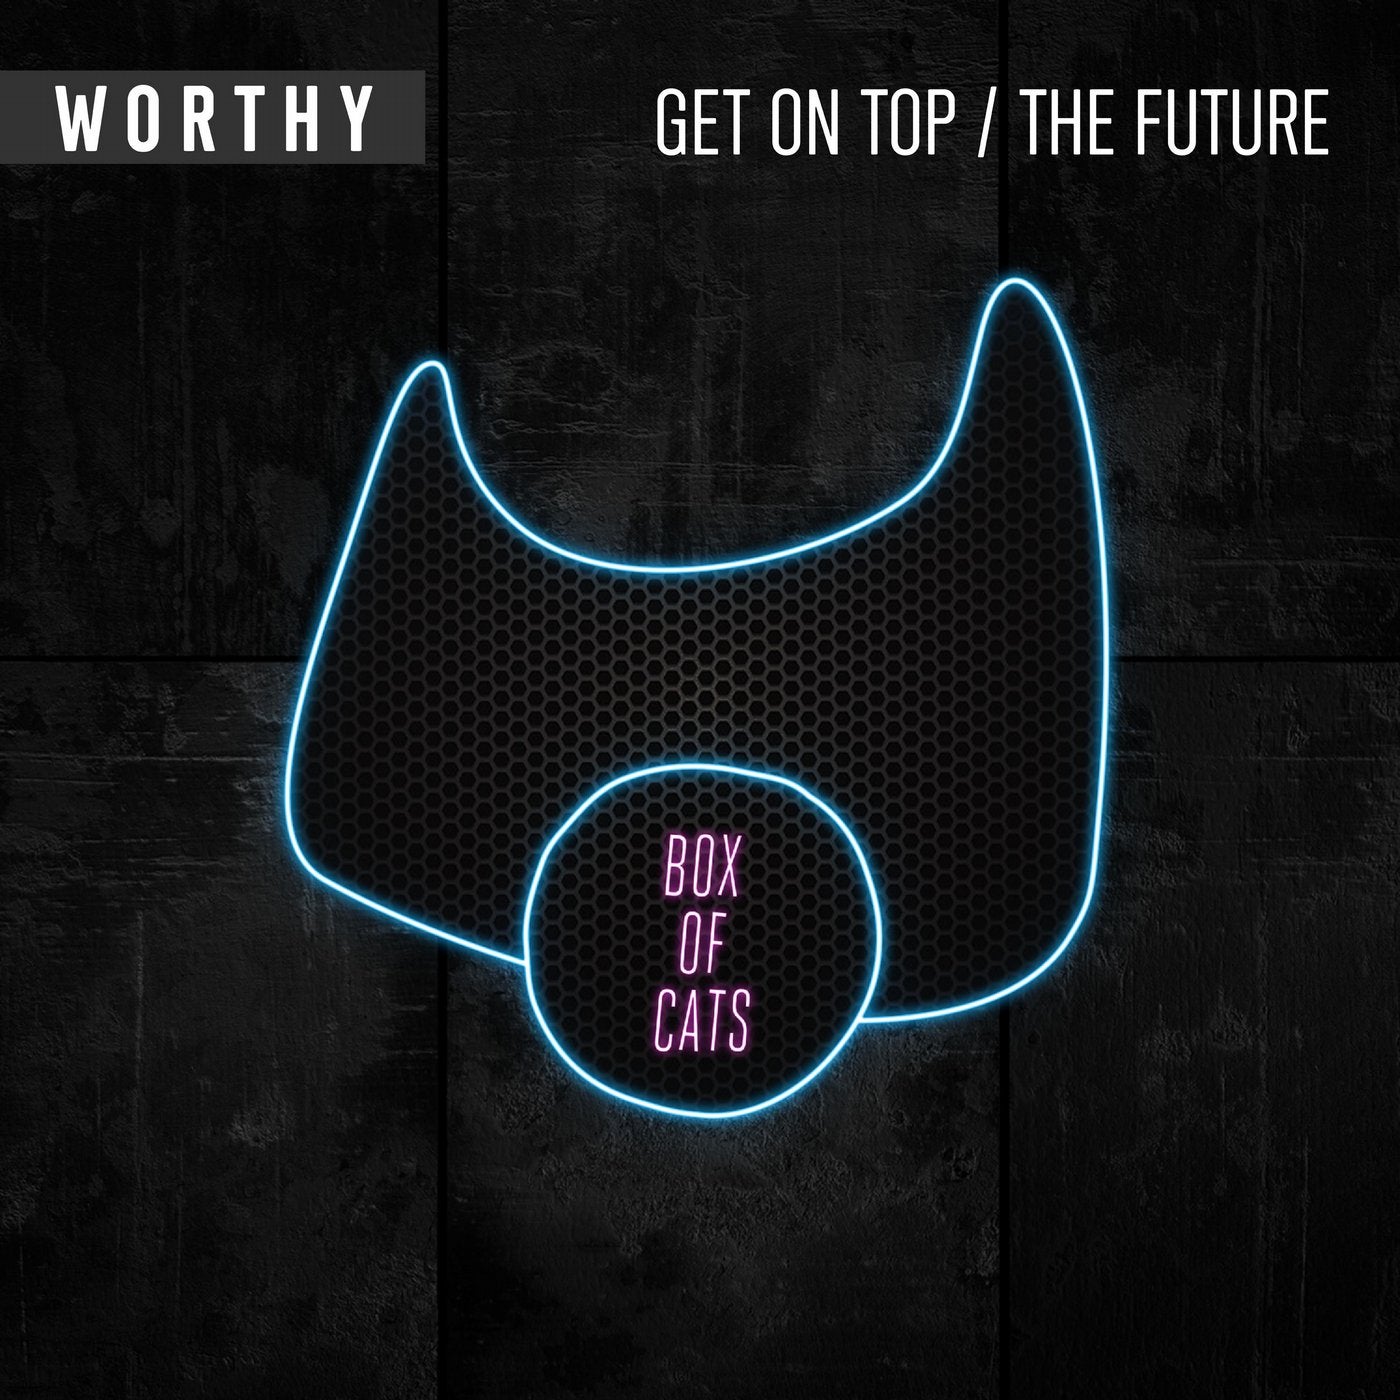 Get on Top / The Future